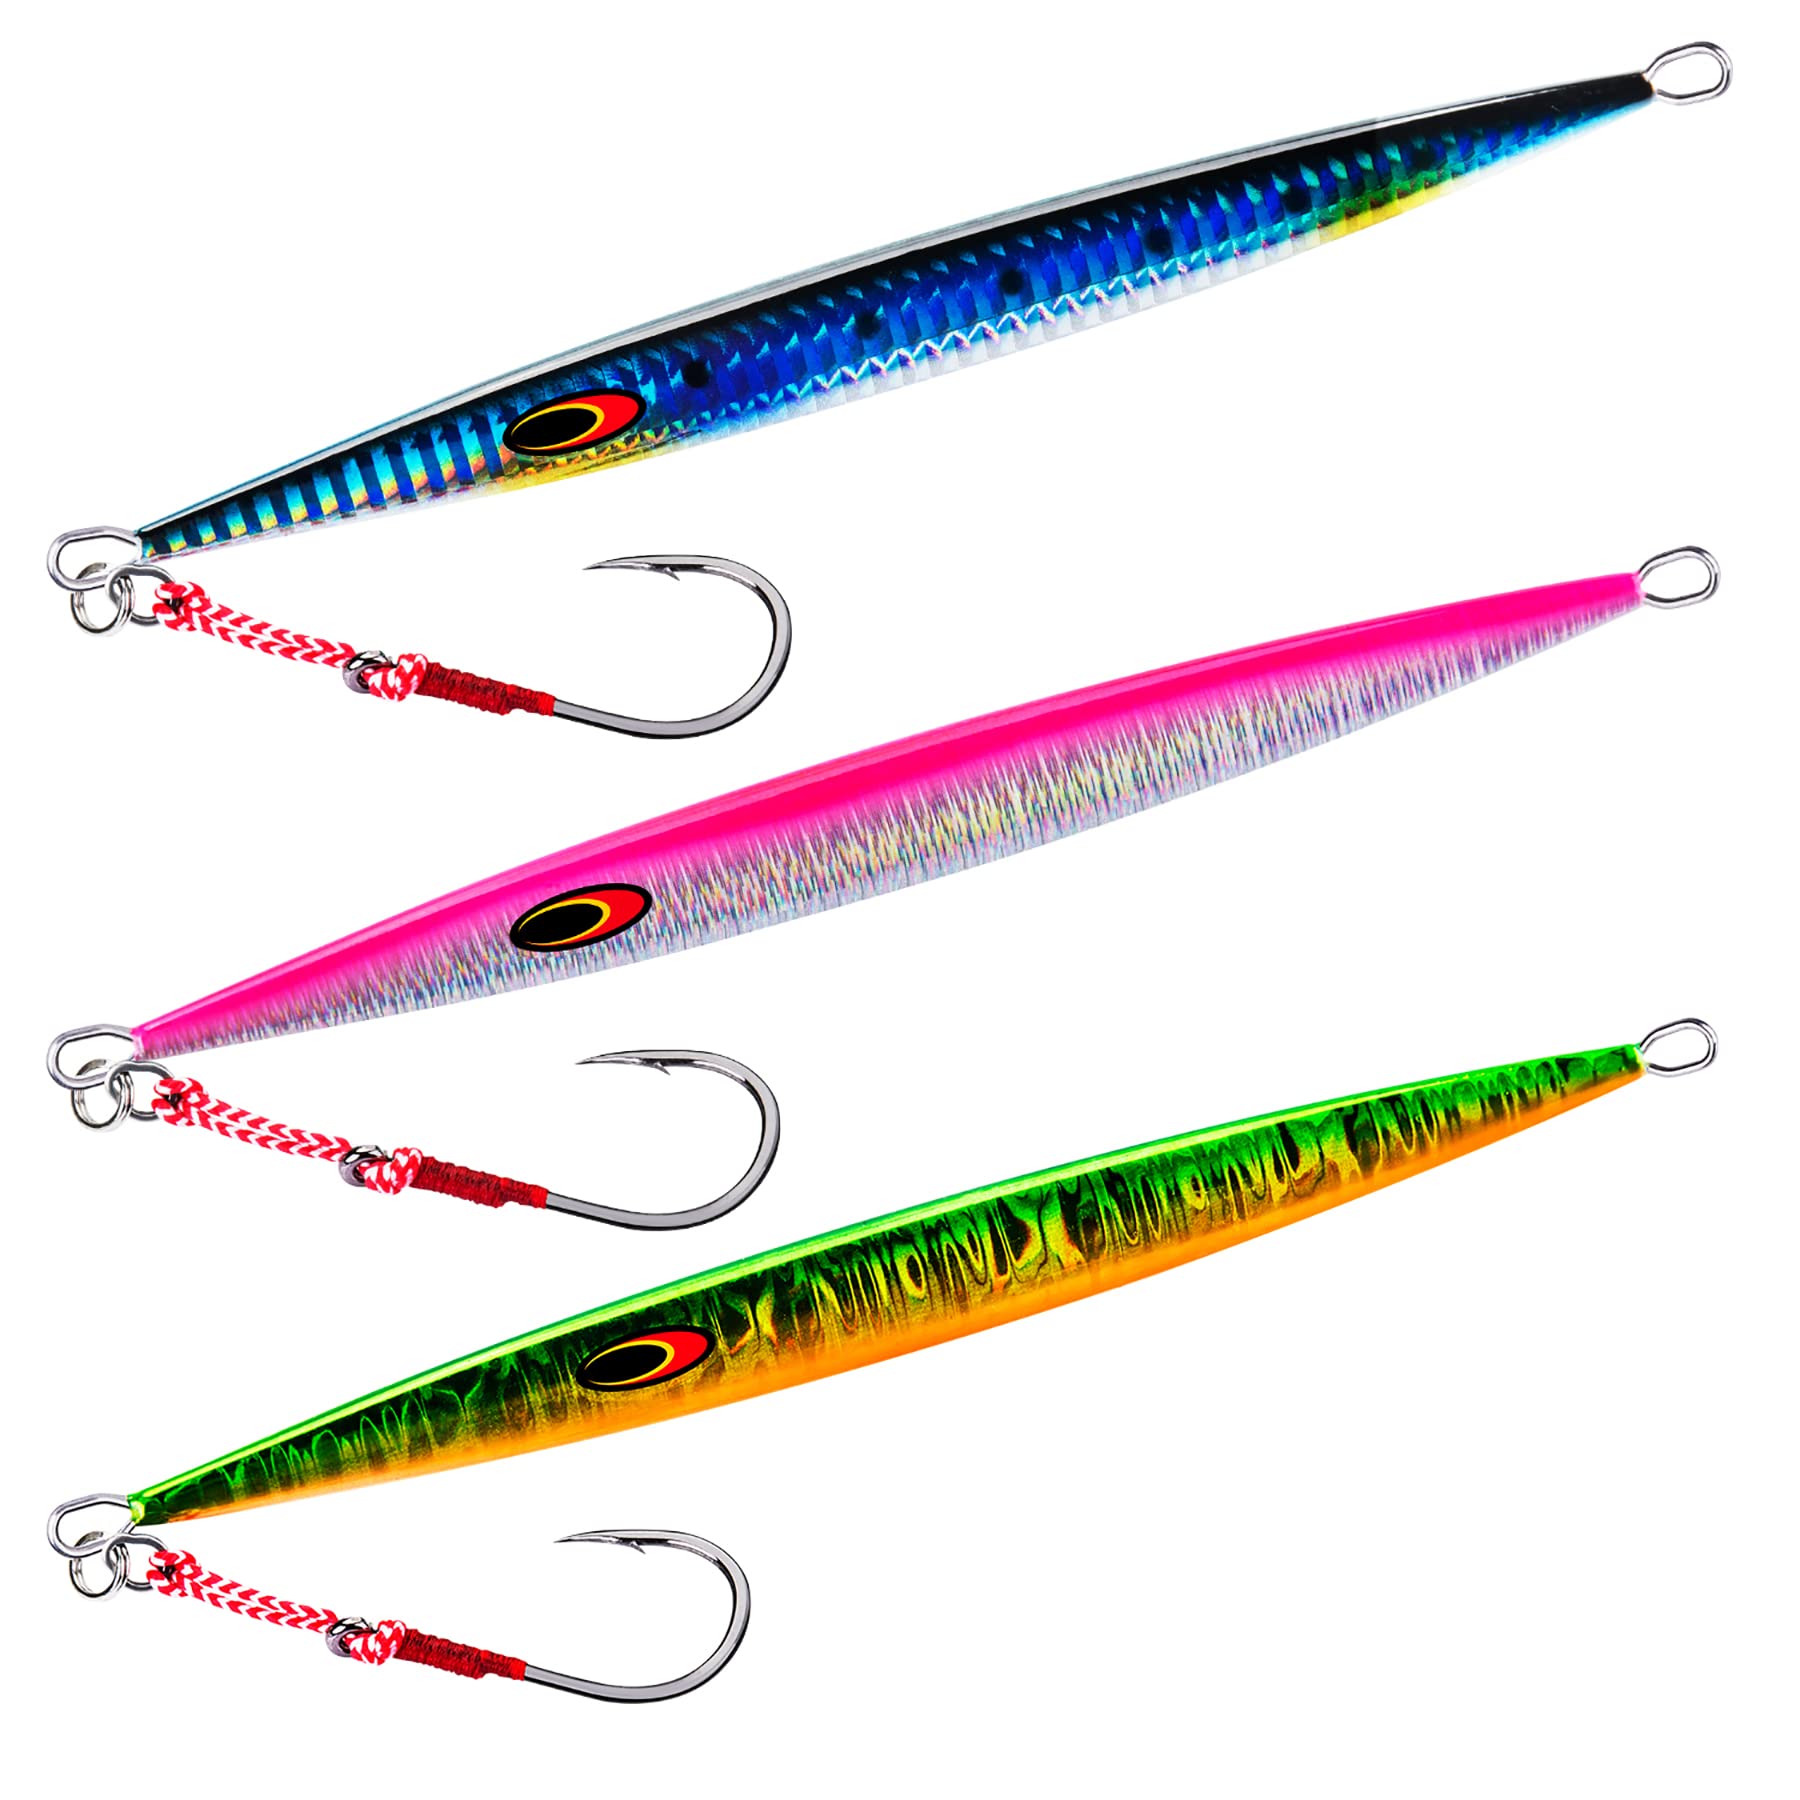 Goture Saltwater Jigs Fishing Lures,Vertical Slow Pitch Jigs Saltwater with  Assist Hook, Glow Stick Lead Jig for Tuna Salmon,Fishing Gear for Men Gifts  80g 100g 150g 200g 250g Saltwater Jigs-Multicolor 3Pcs 